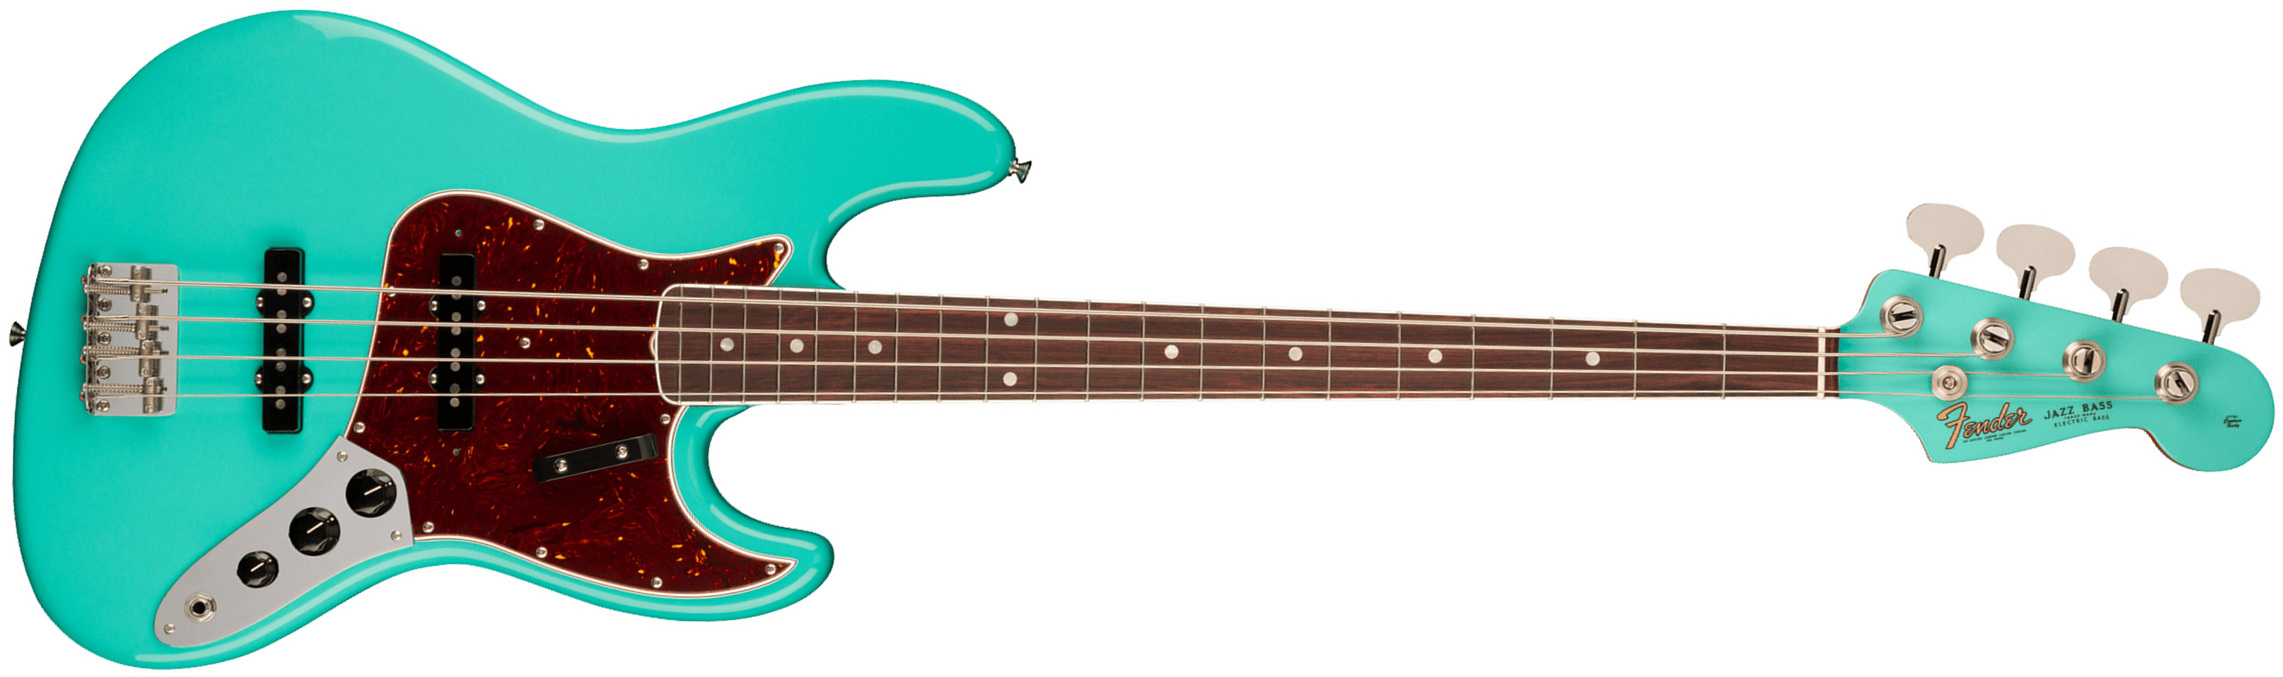 Fender Jazz Bass 1966 American Vintage Ii Usa Rw - Sea Foam Green - Solid body electric bass - Main picture